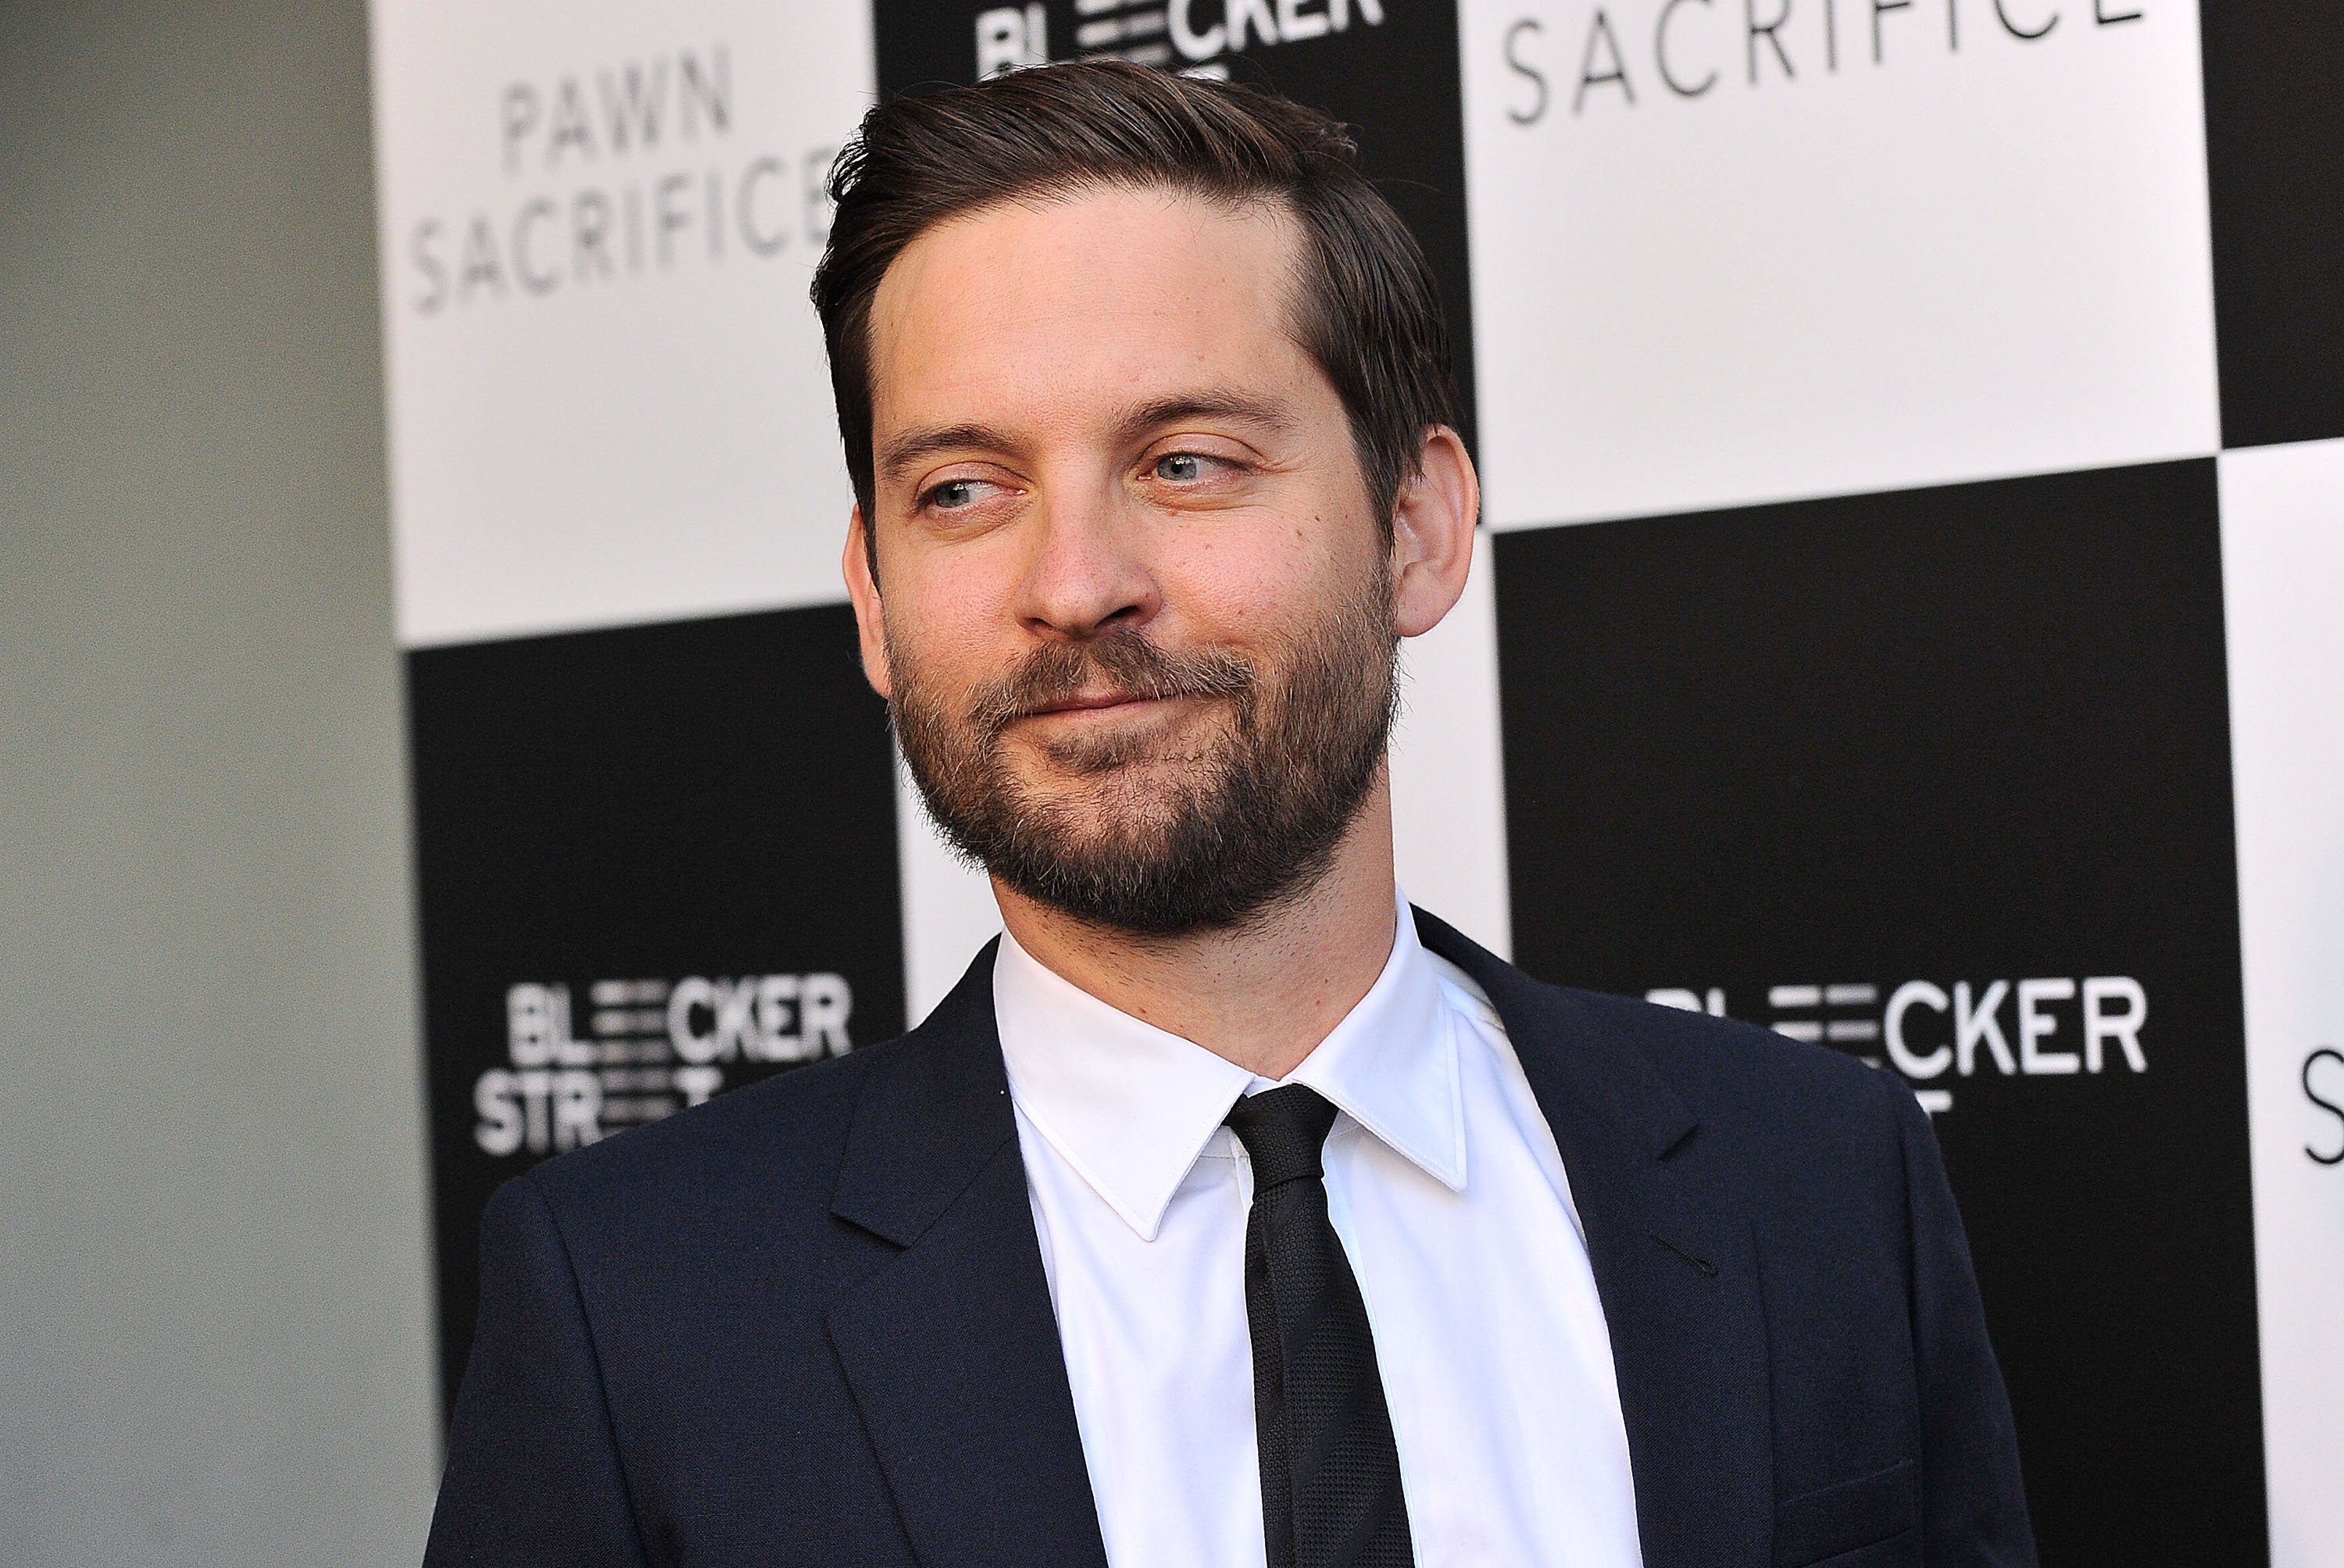 Tobey Maguire attends the "Pawn Sacrifice" film premiere at Harmony Gold Theatre on September 8, 2015, in Los Angeles, California. | Source: Getty Images